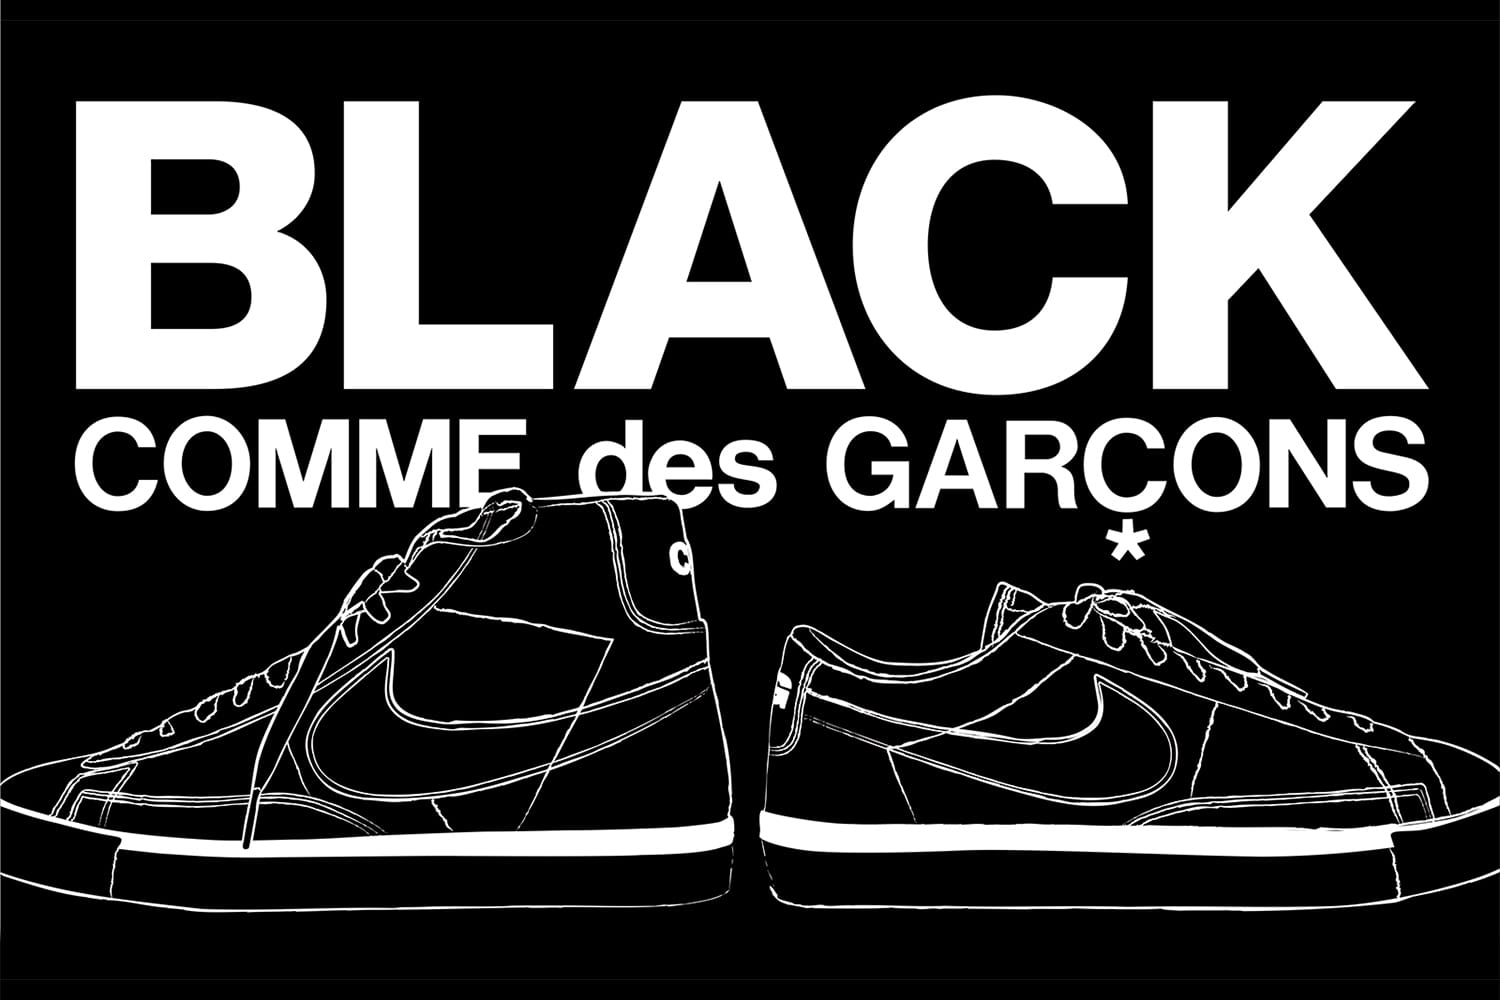 Dover Street Market New York to Release More BLACK COMME des